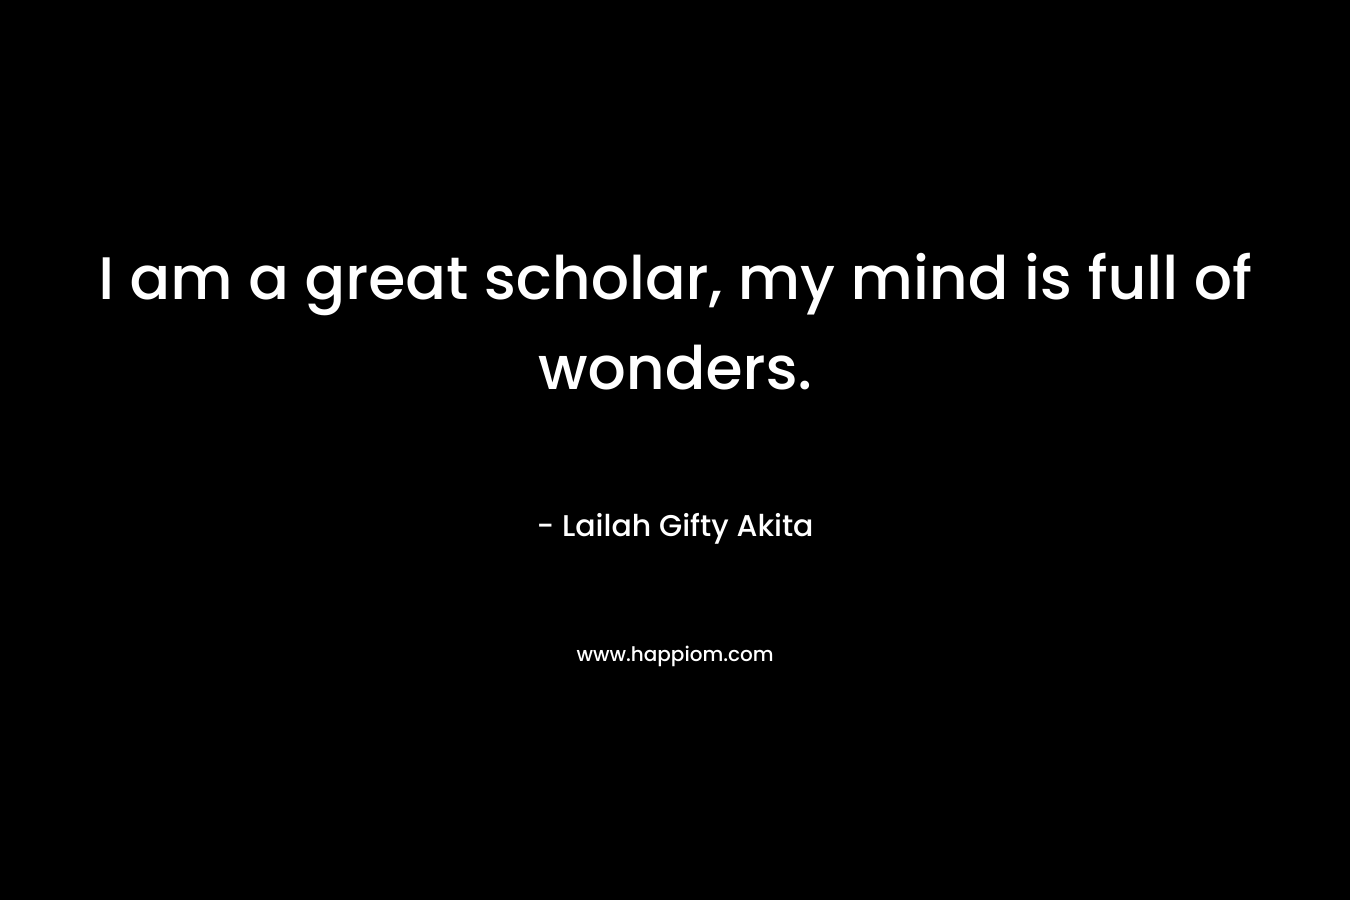 I am a great scholar, my mind is full of wonders. – Lailah Gifty Akita